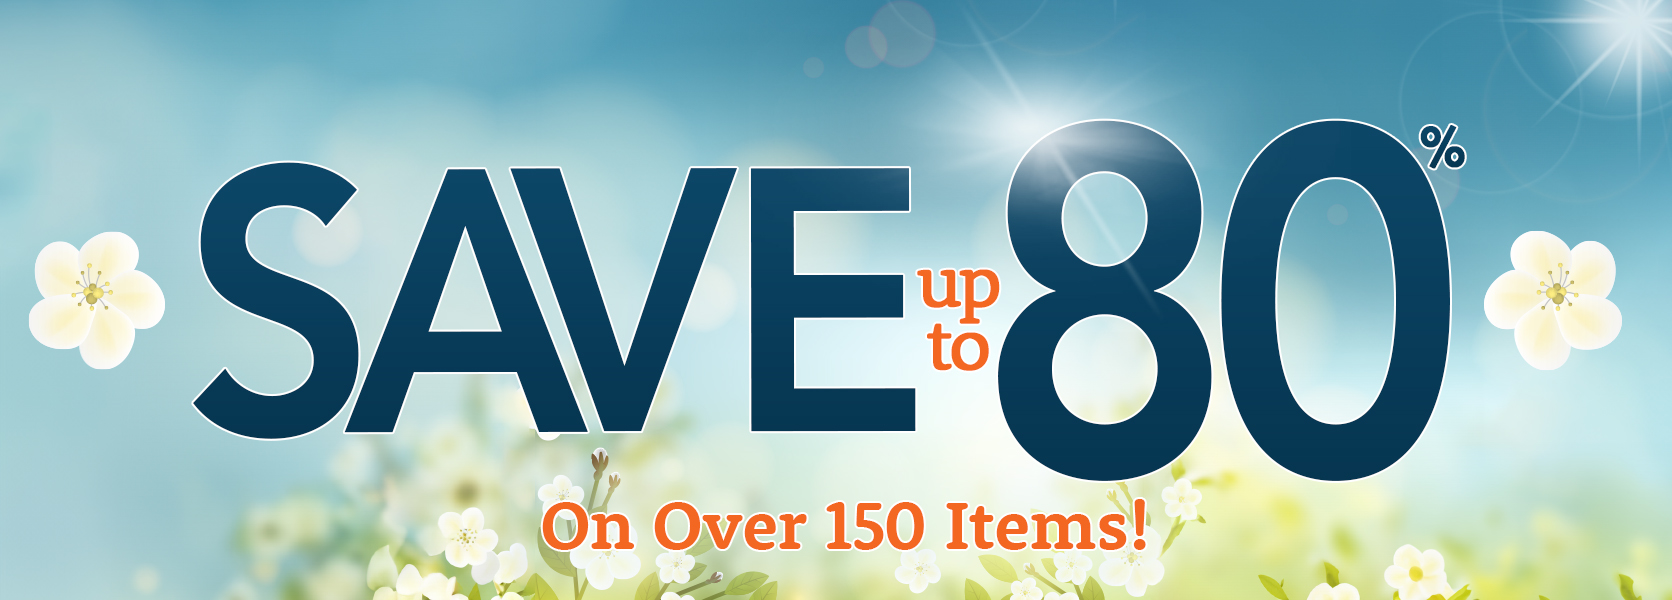 SAVE up to 80% on 150+ Items